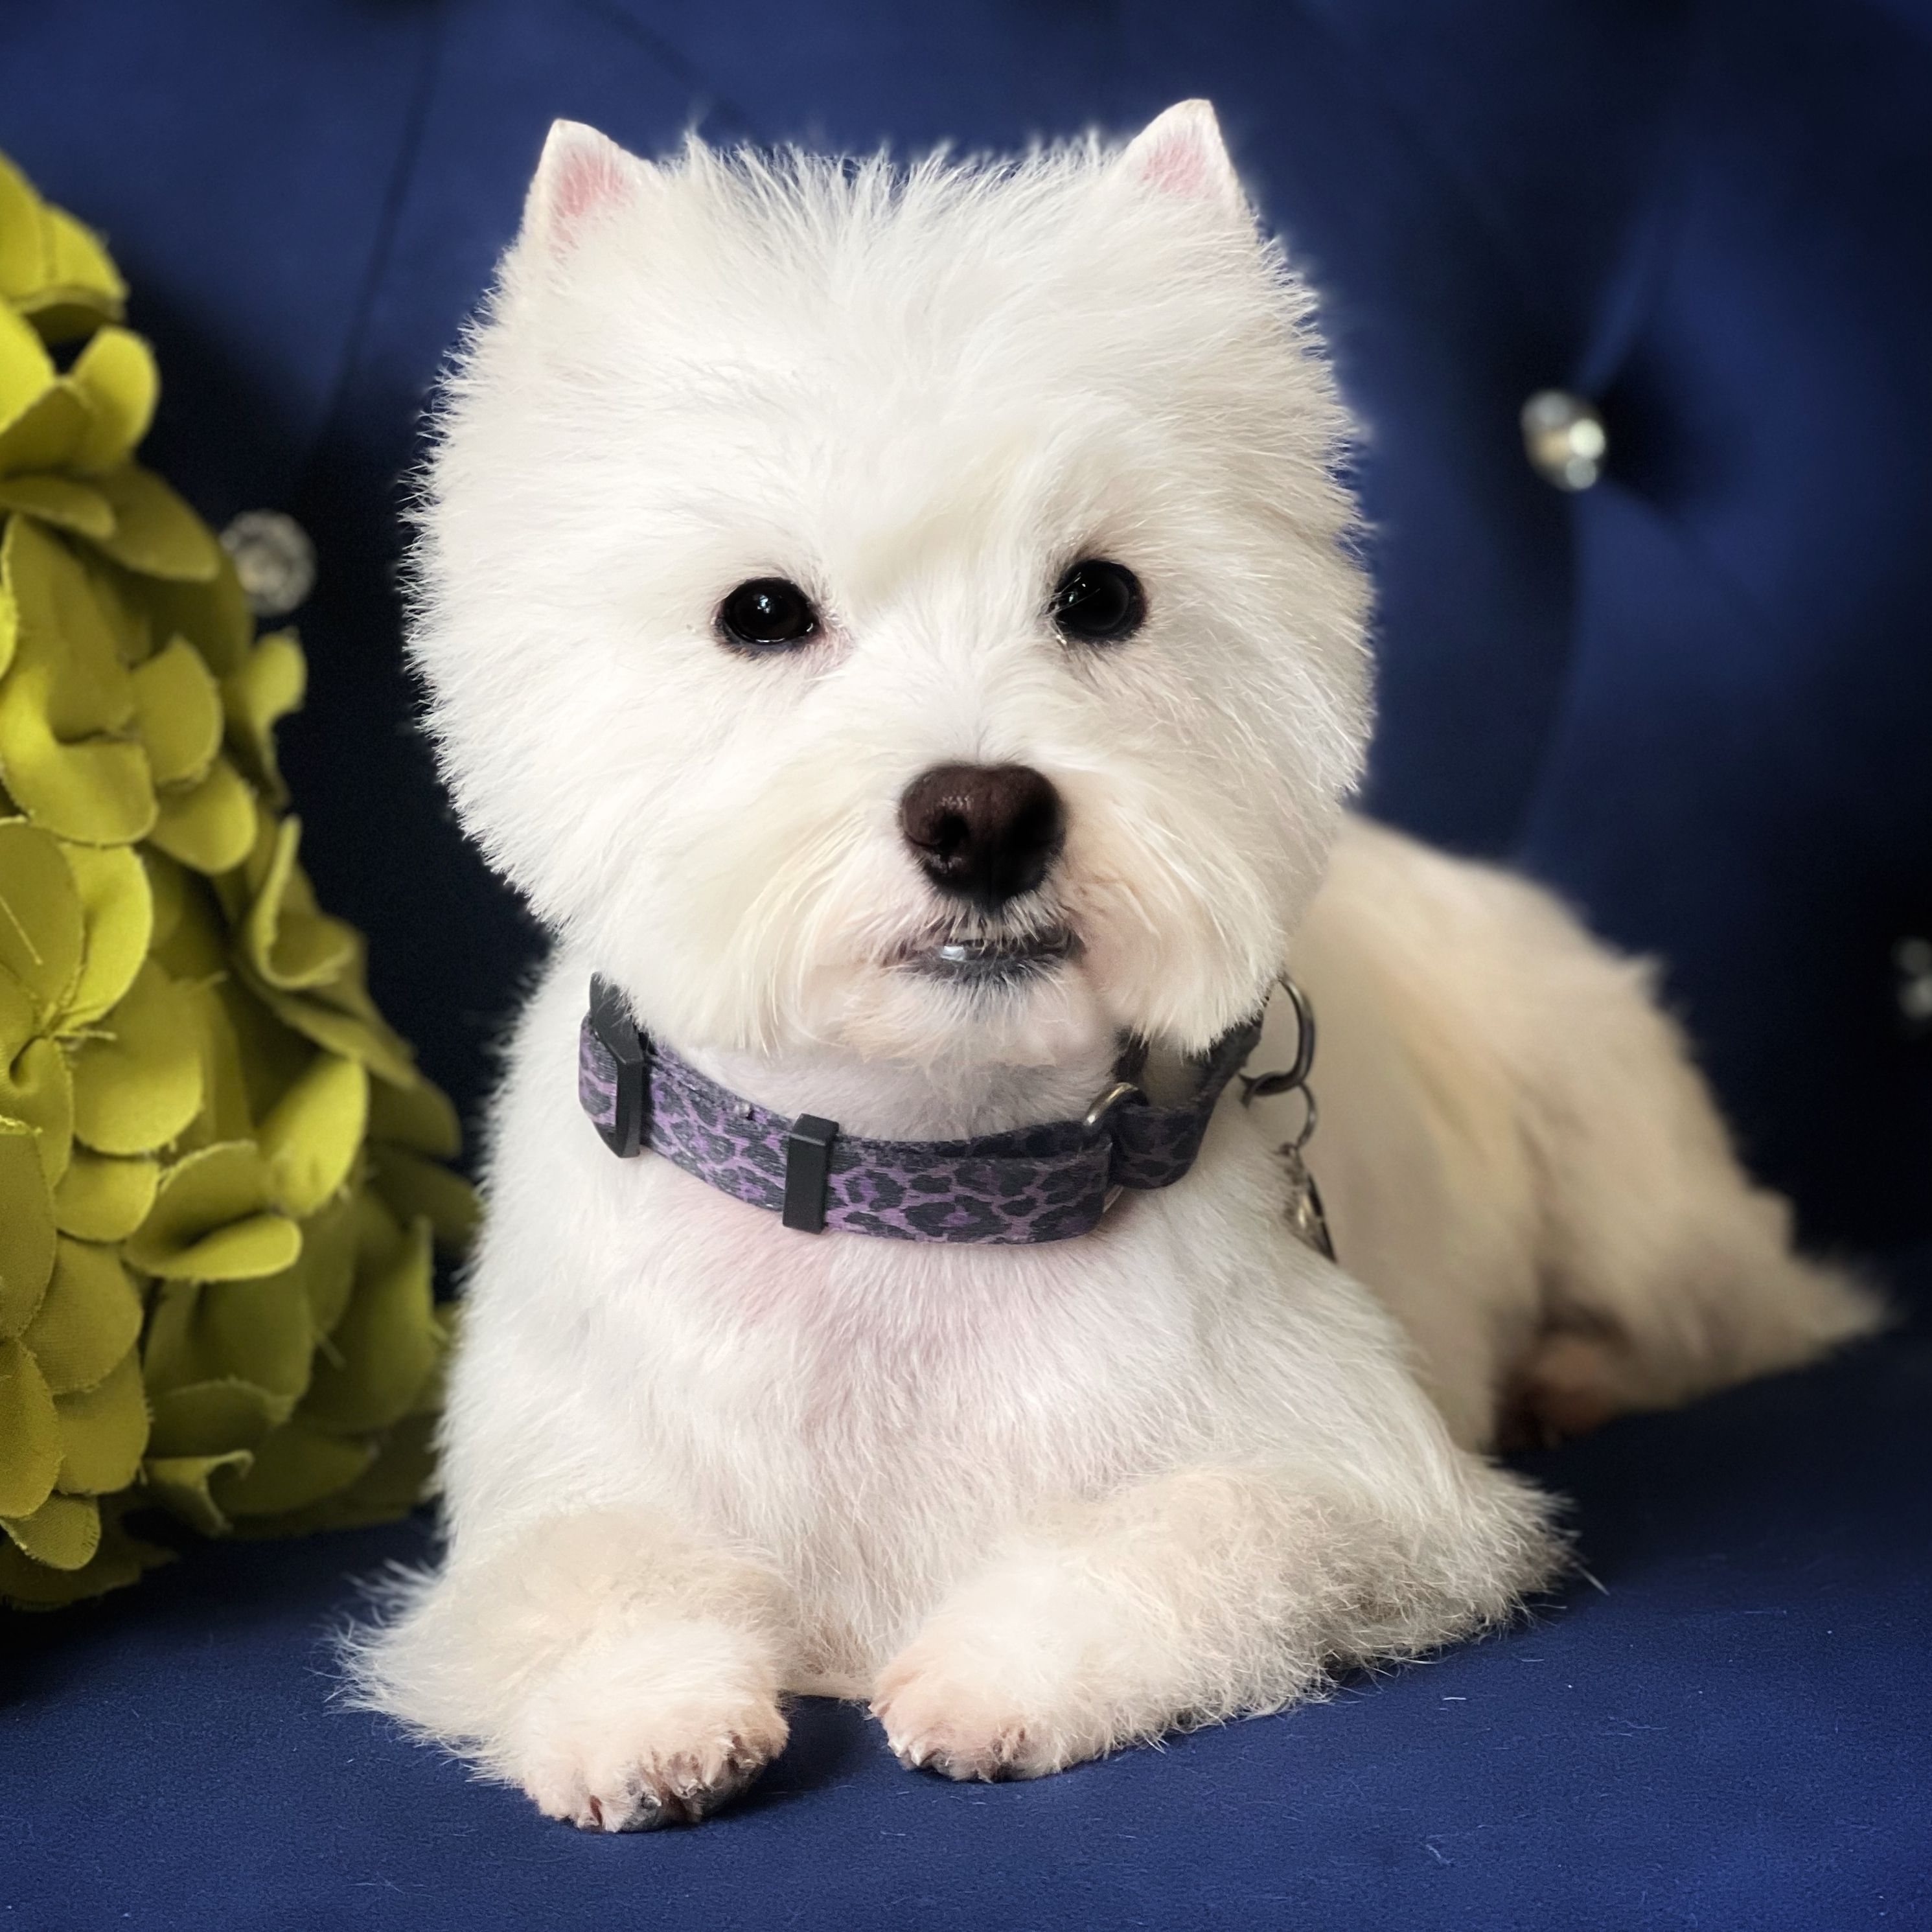 A freshly groomed West Highland White Terrier wearing a purple patterned collar laying on a couch.